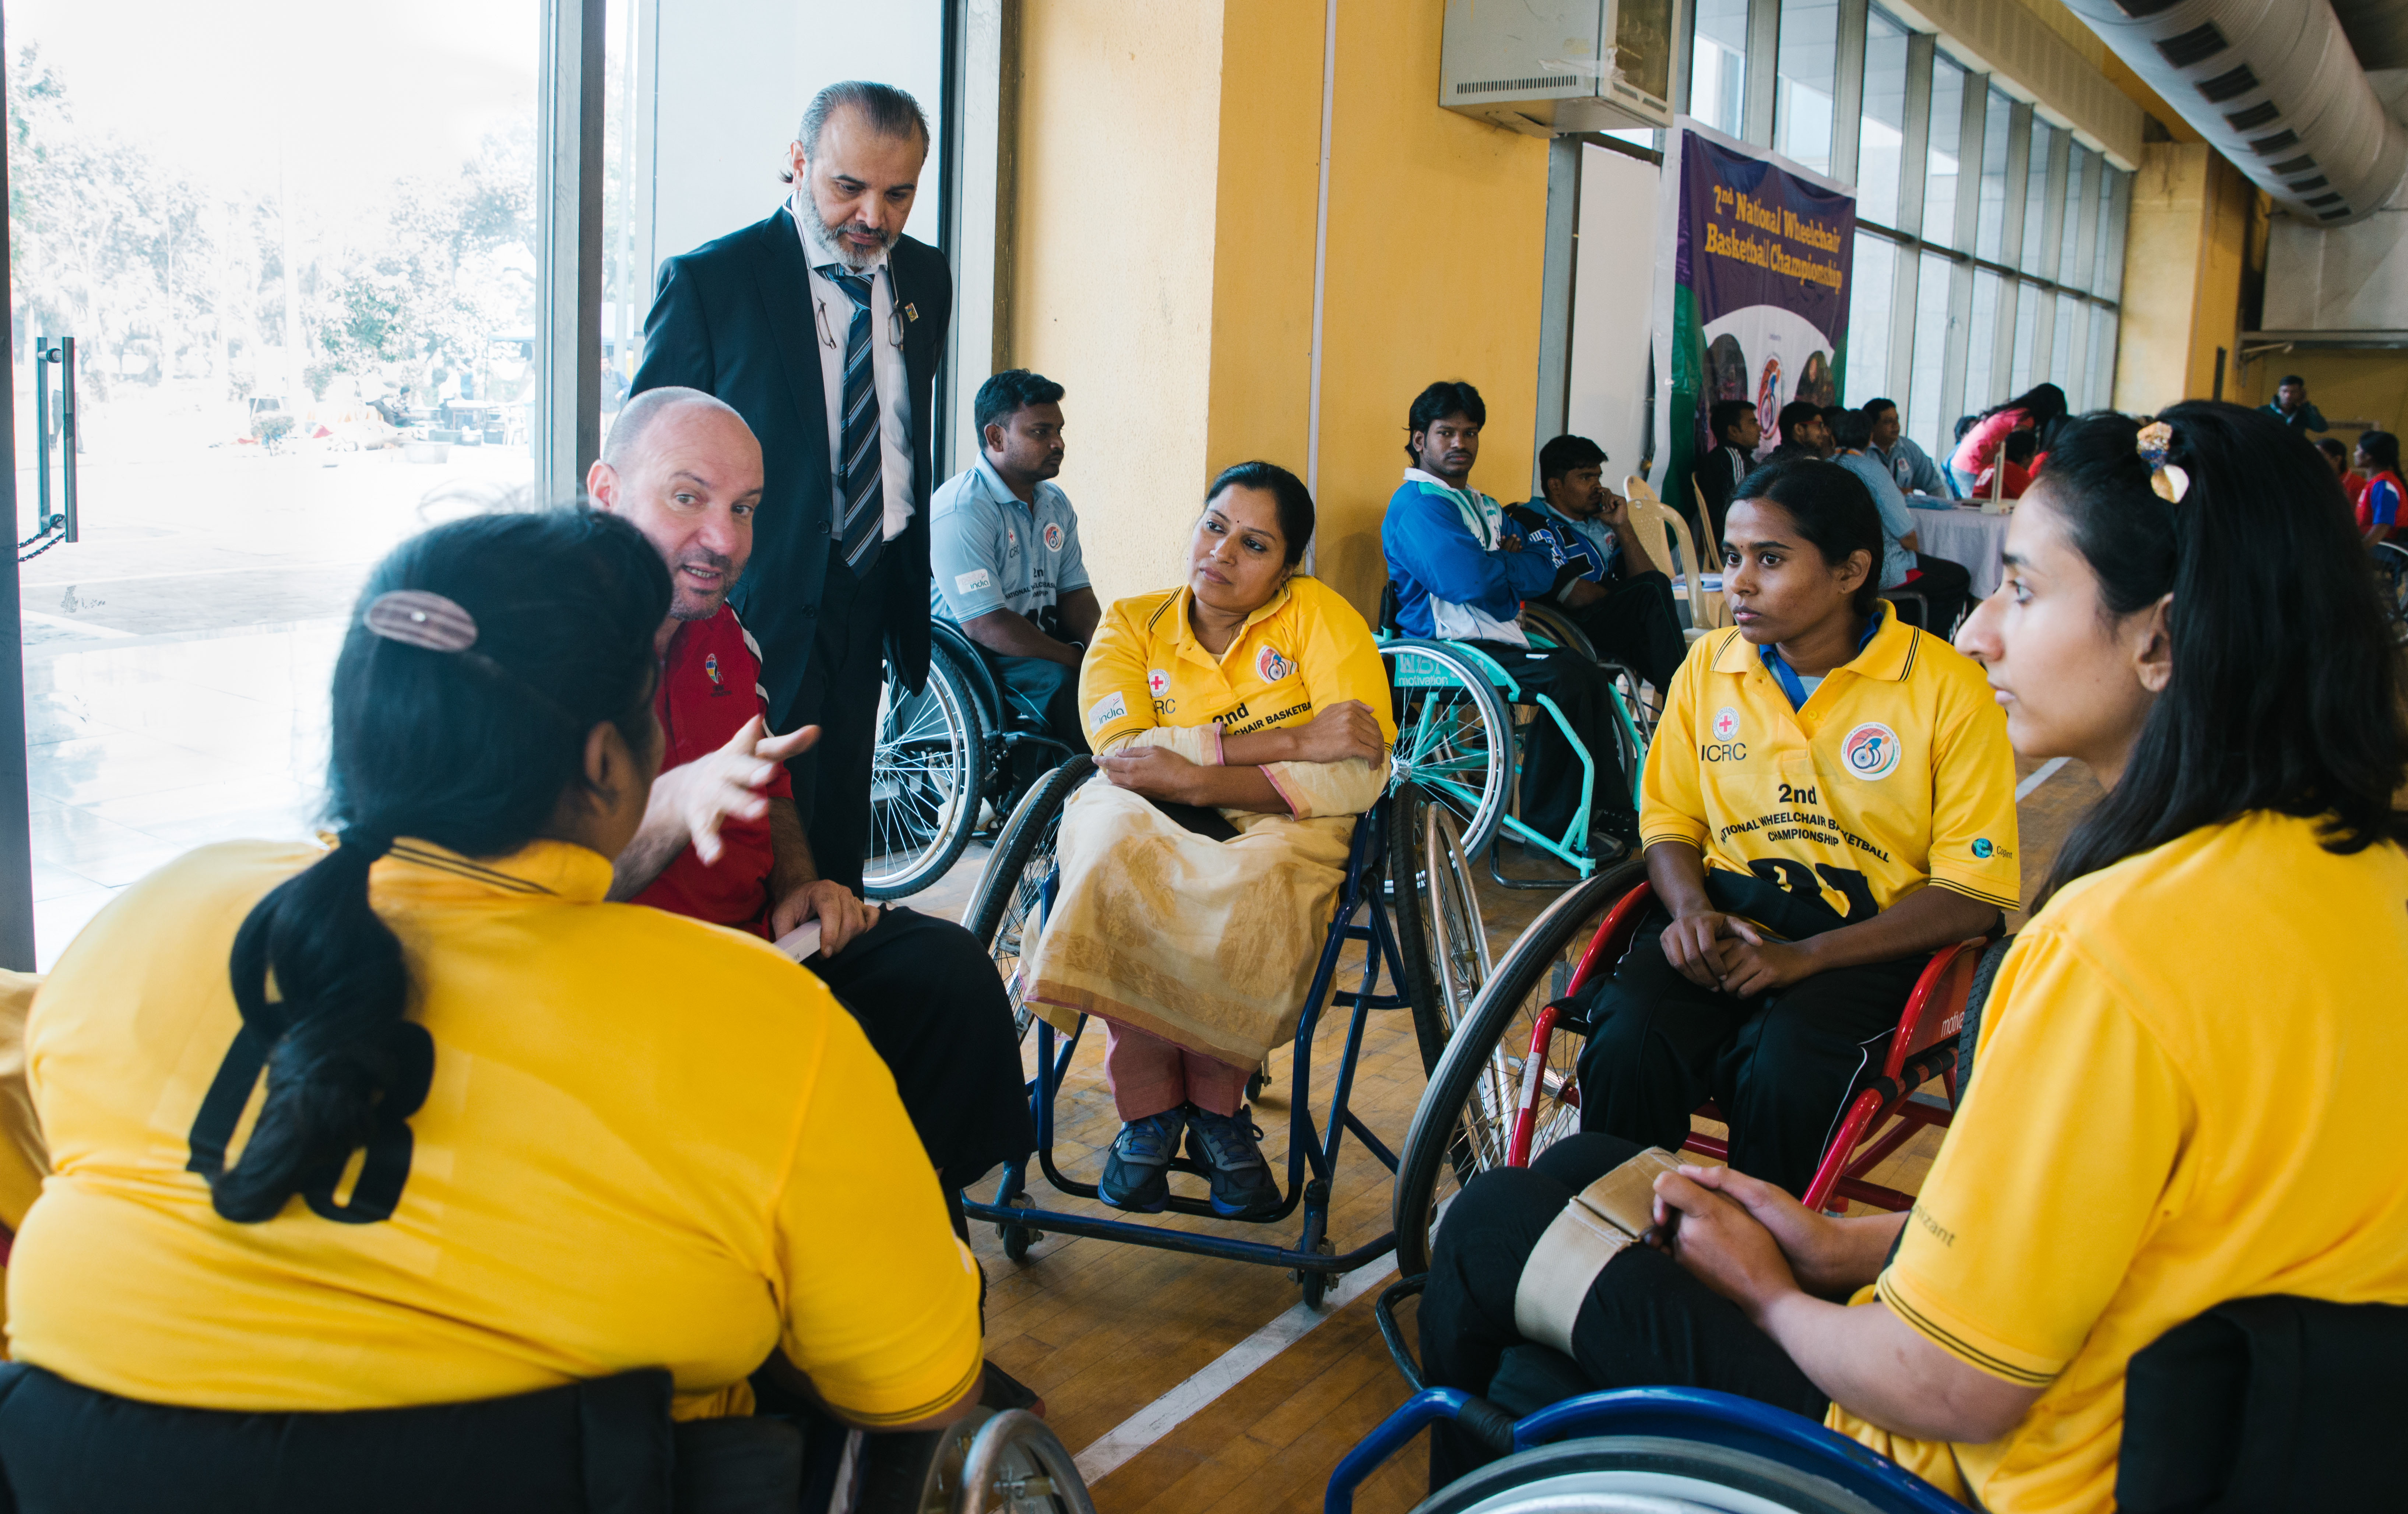 Madhavi with the first women’s team at the National Wheelchair Basketball Tournament, pay attention to their coach during a timeout amidst the match.